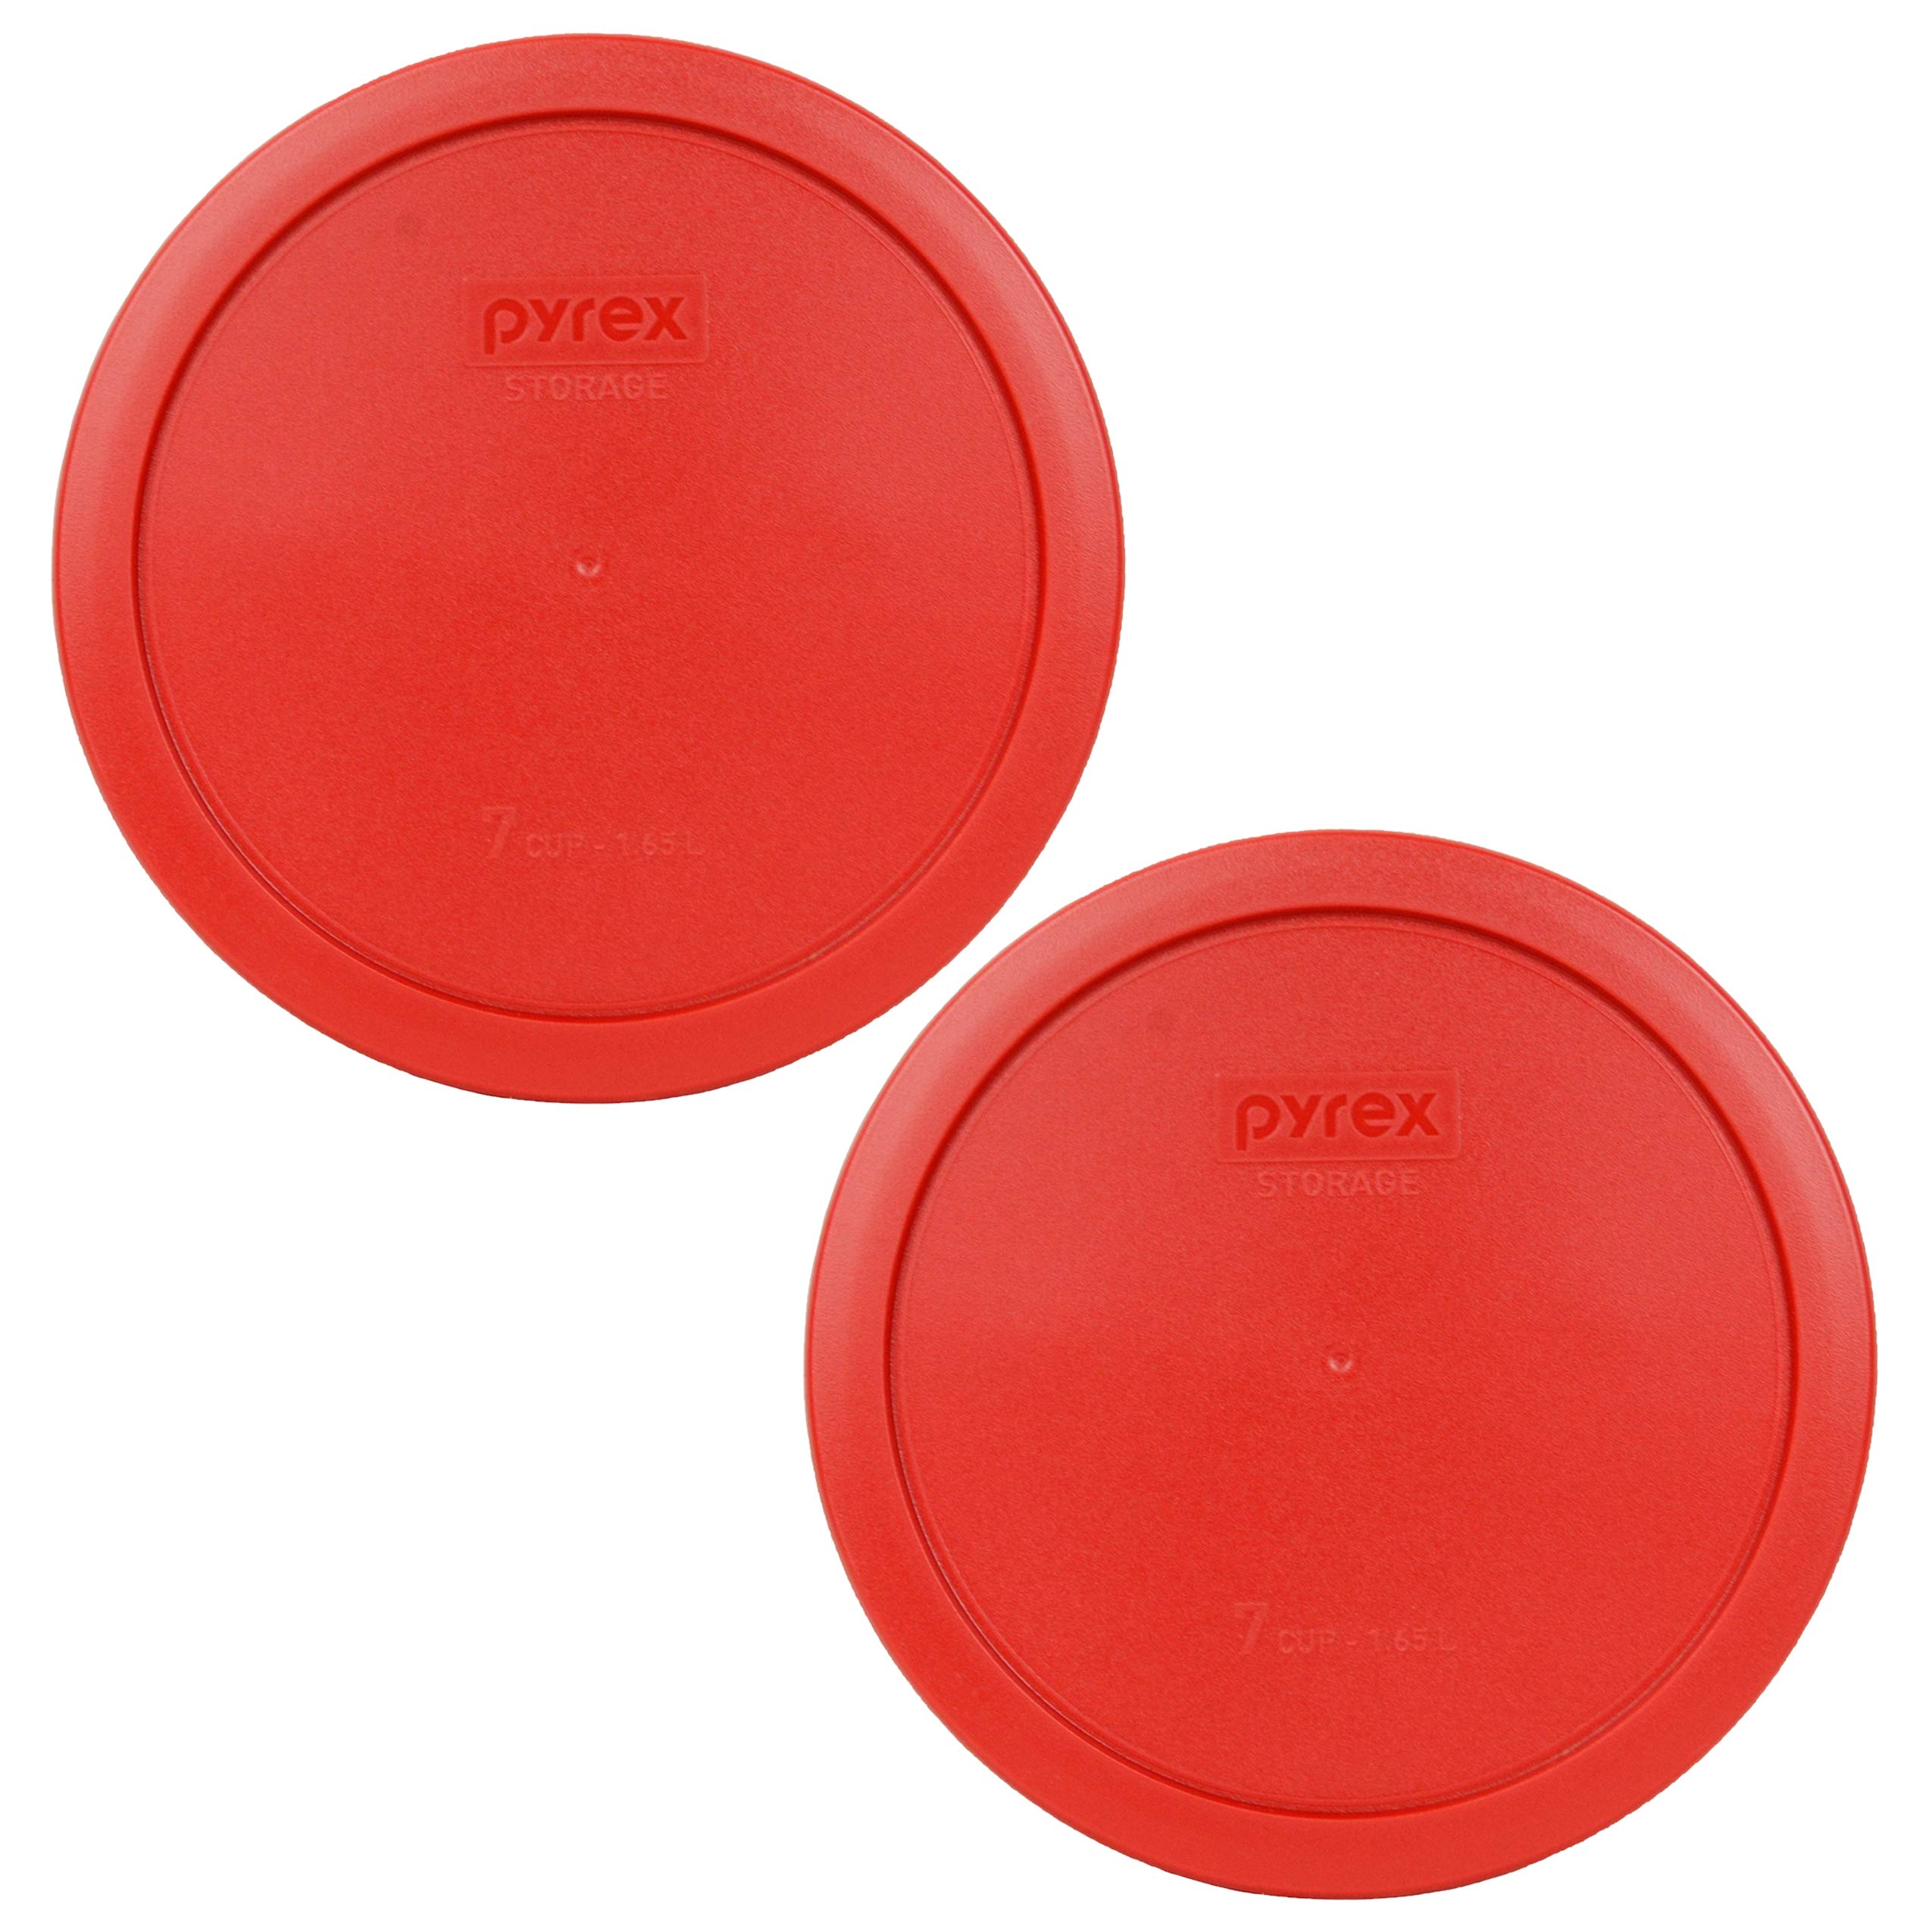 Pyrex 7402-PC Red Round Storage Replacement Lid Cover fits 6 & 7 Cup 7